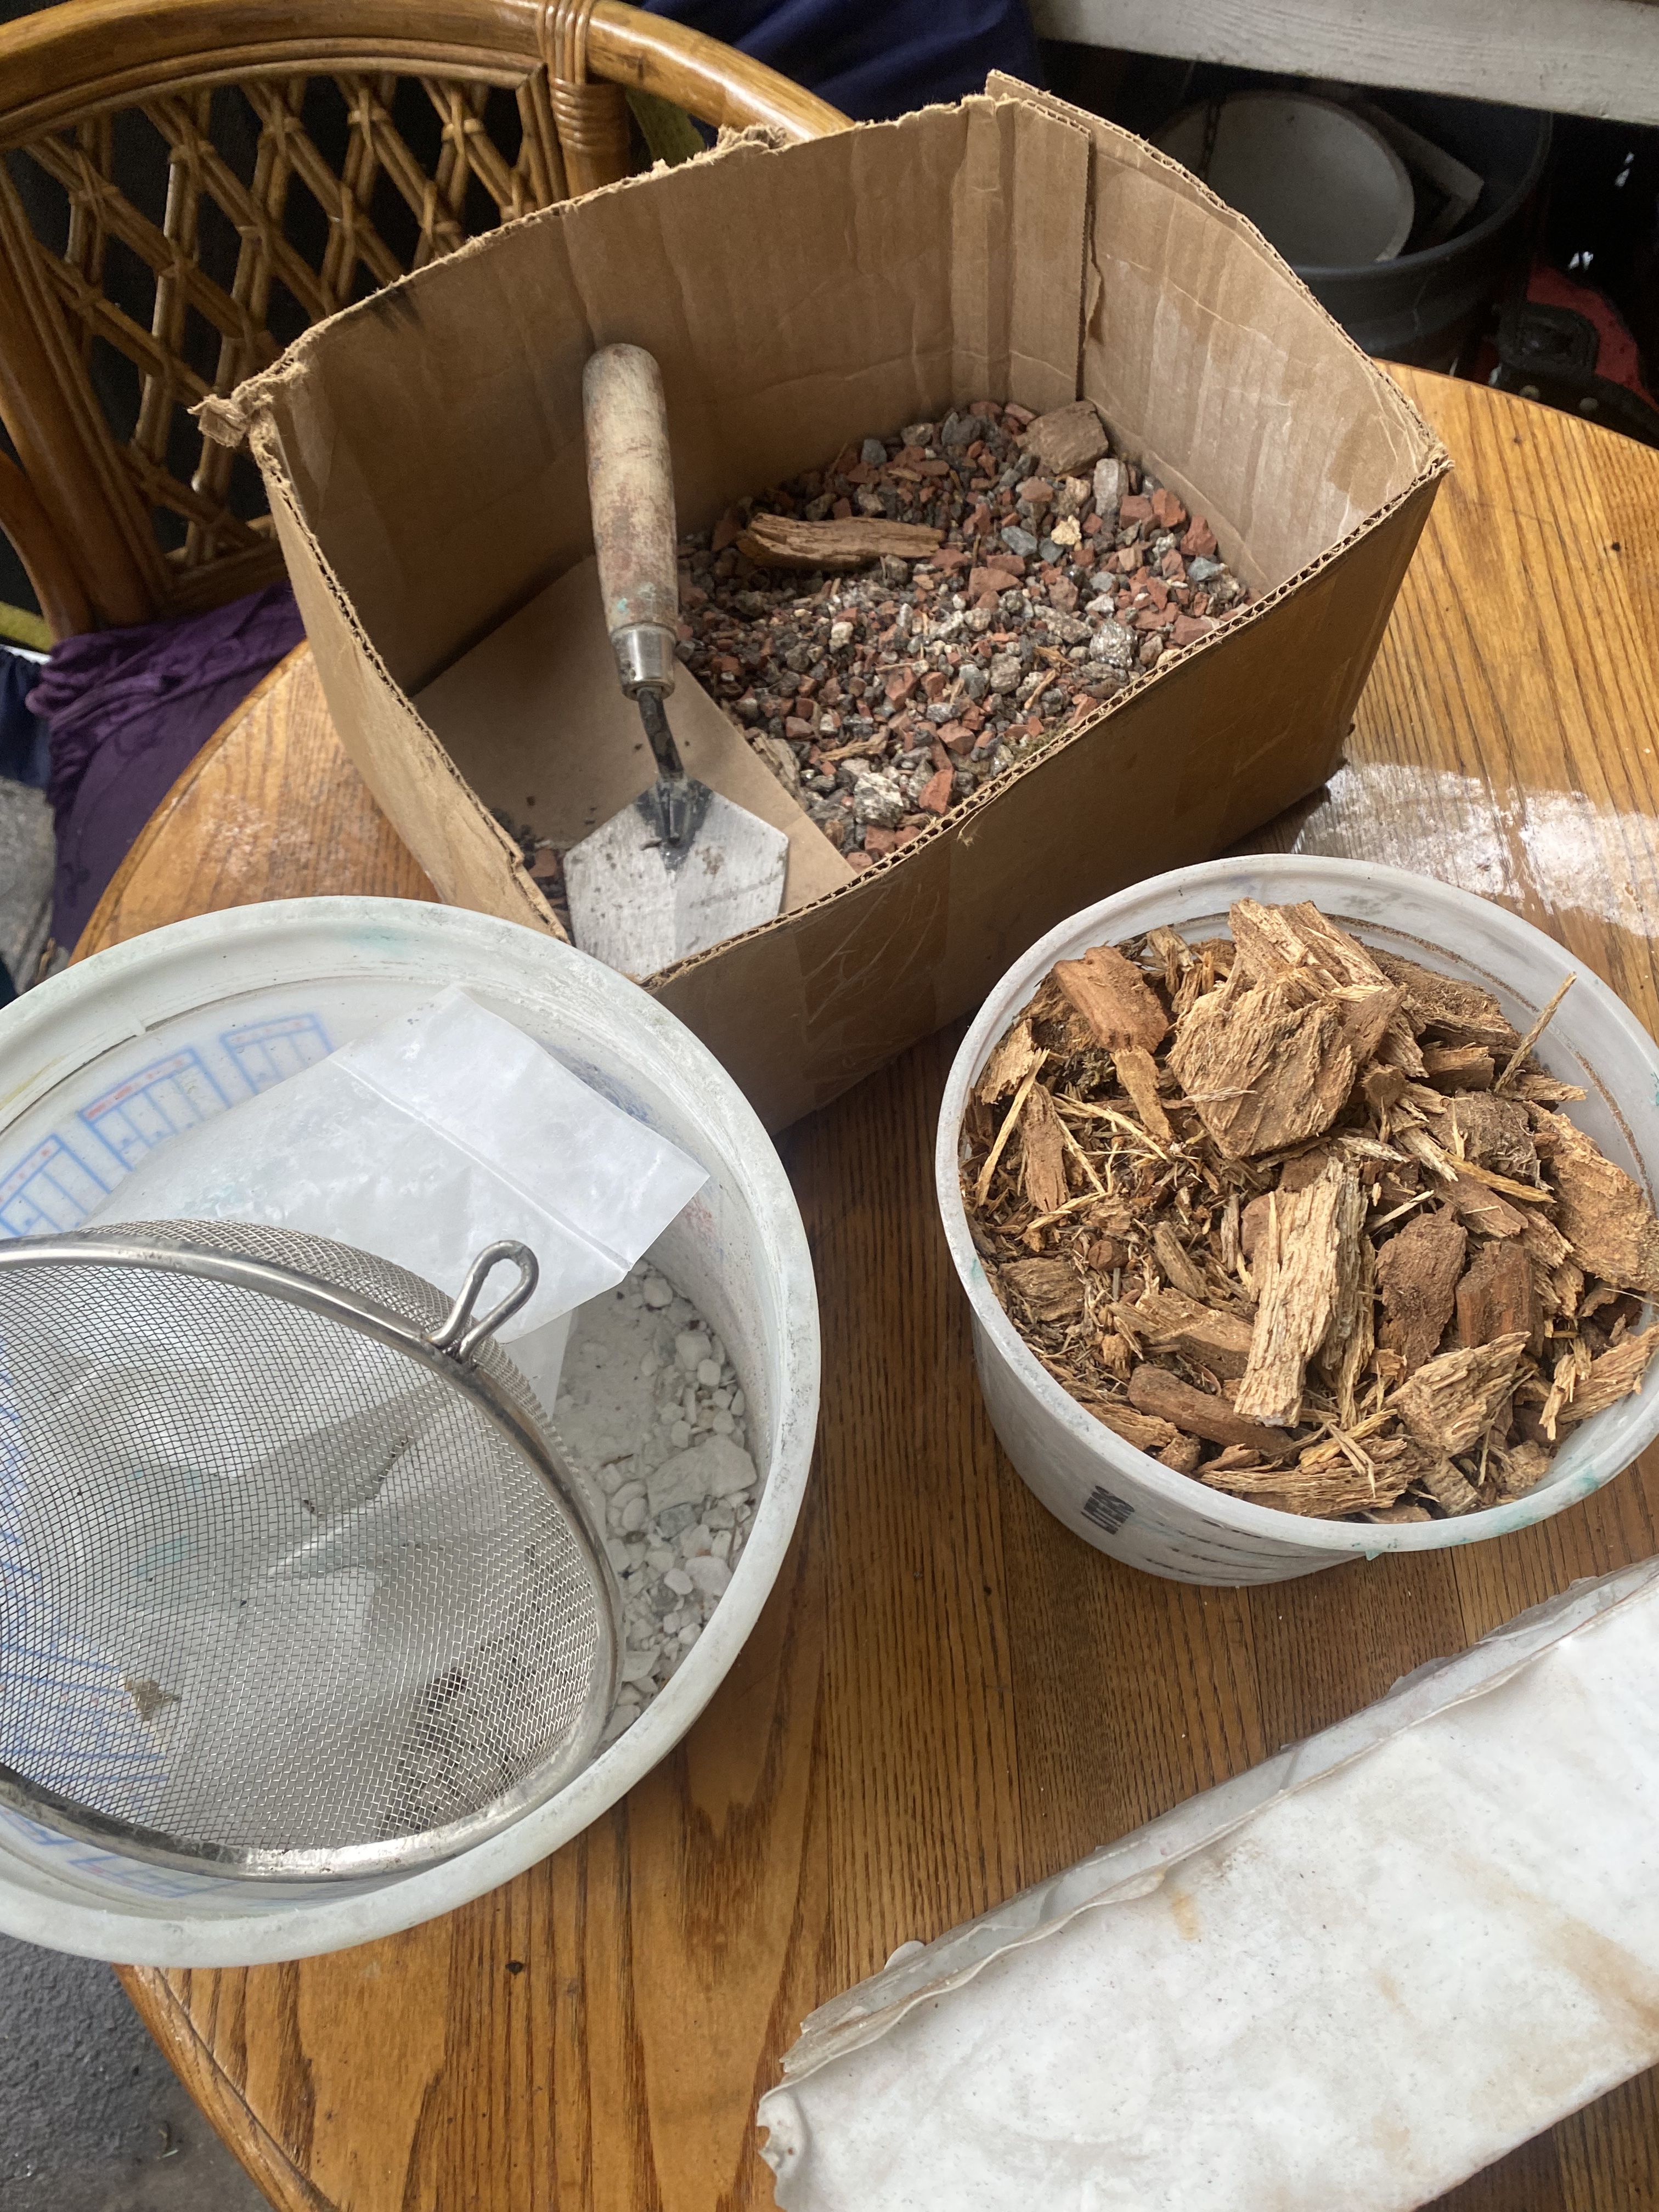 Containers of various organic materials including sand, wood chips, and pebbles.